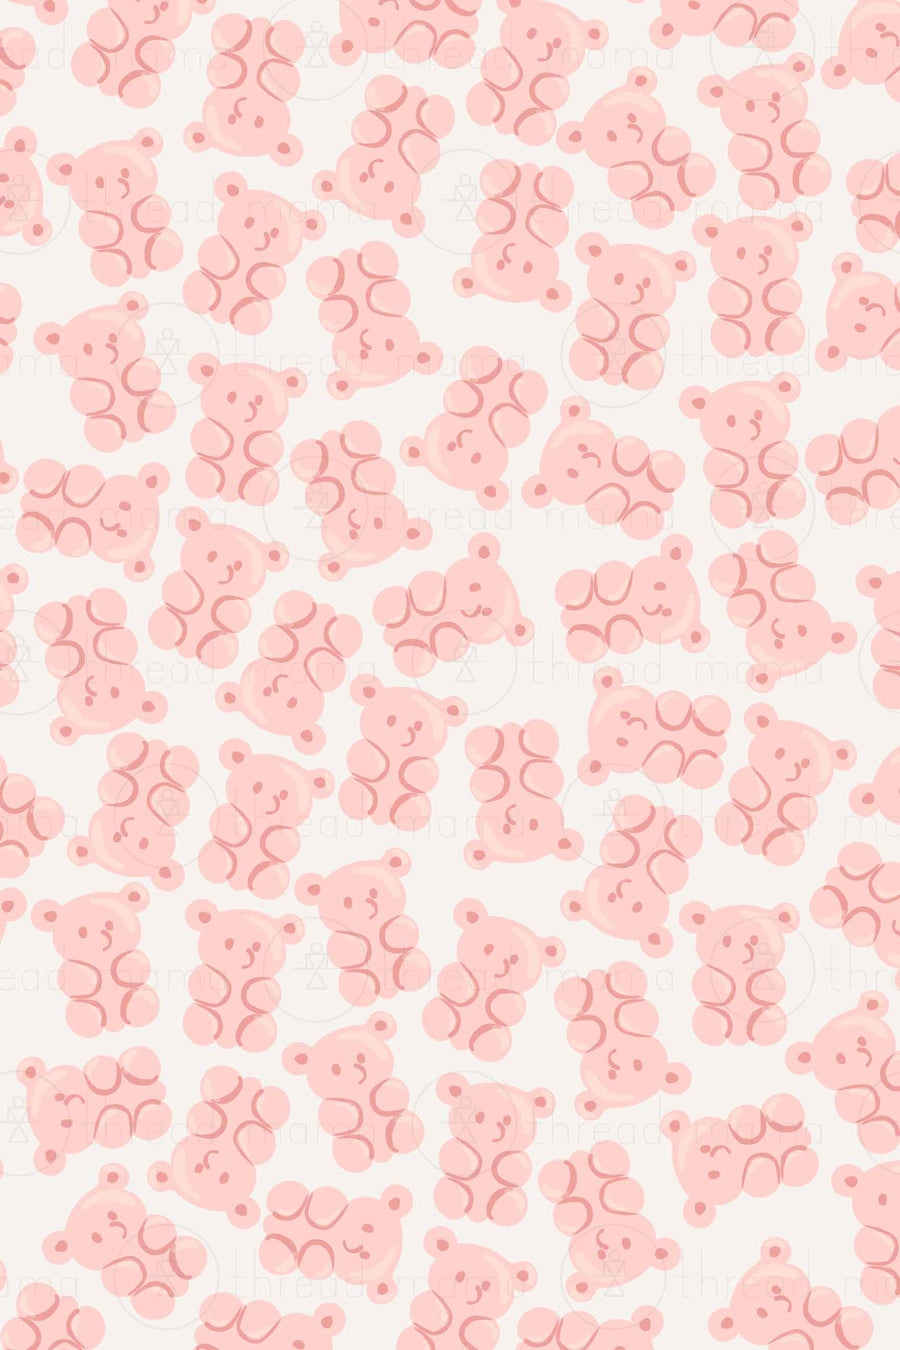 Repeating Pattern 56 (Seamless)